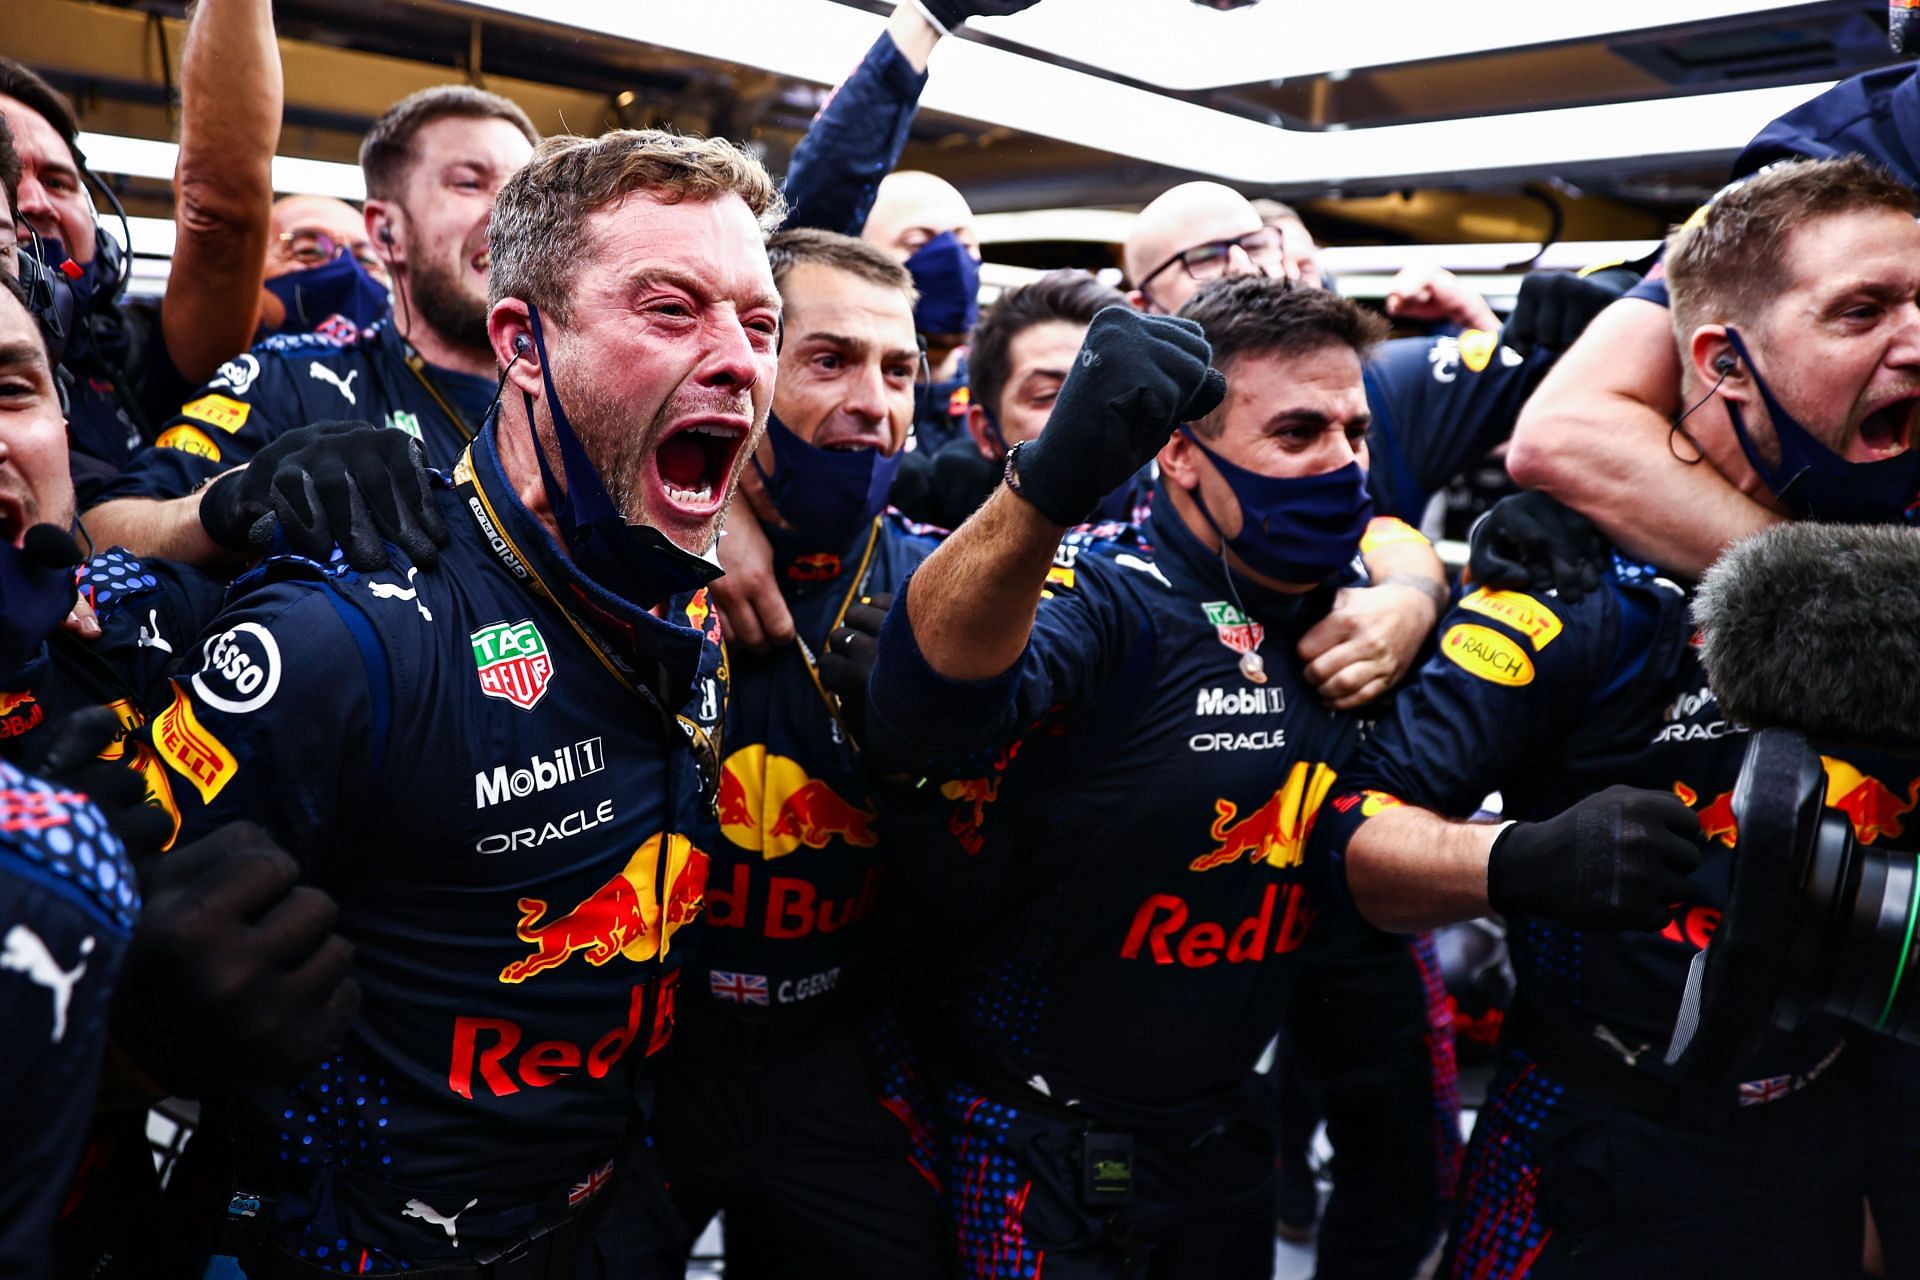 Red Bull will be looking to go one better by winning the constructors title this season